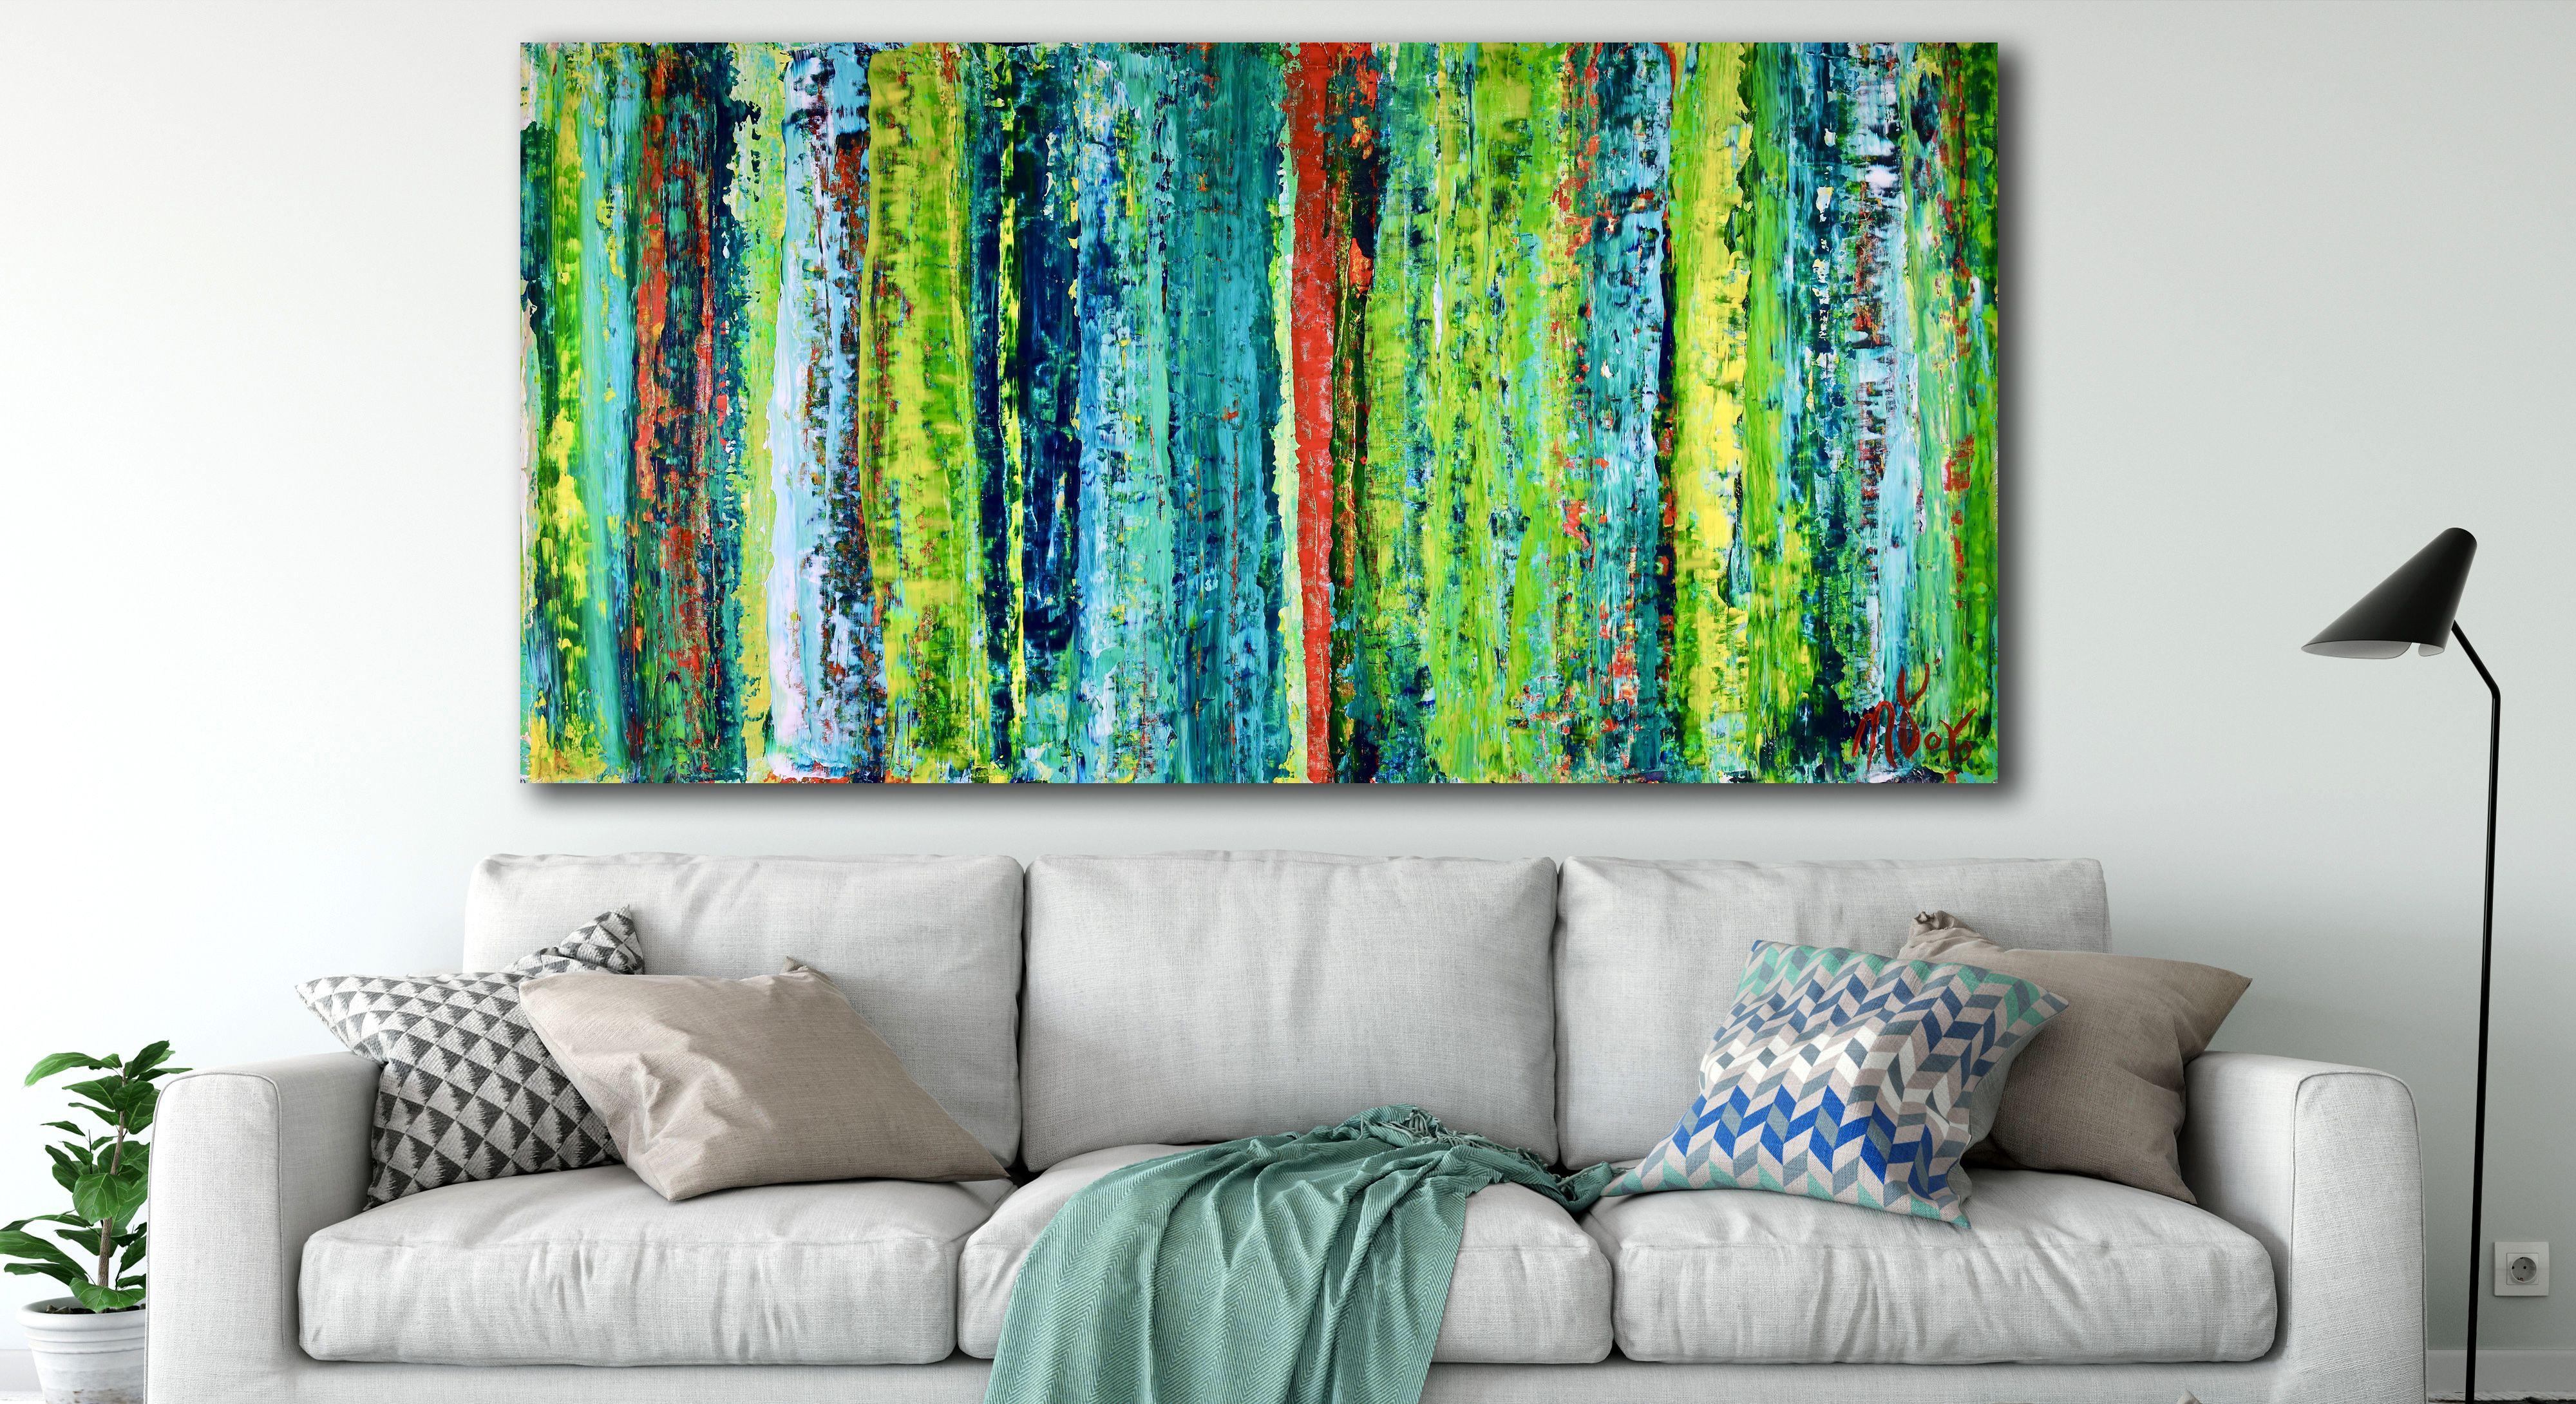 Contemplative green abstract nature inspired, very texture and bold! signed.    ORIGINAL FINE ABSTRACTS - ONE OF A KIND!  I only make original works. Each is a one of a kind so you will have the only one! My artwork is my passion and you can SEE